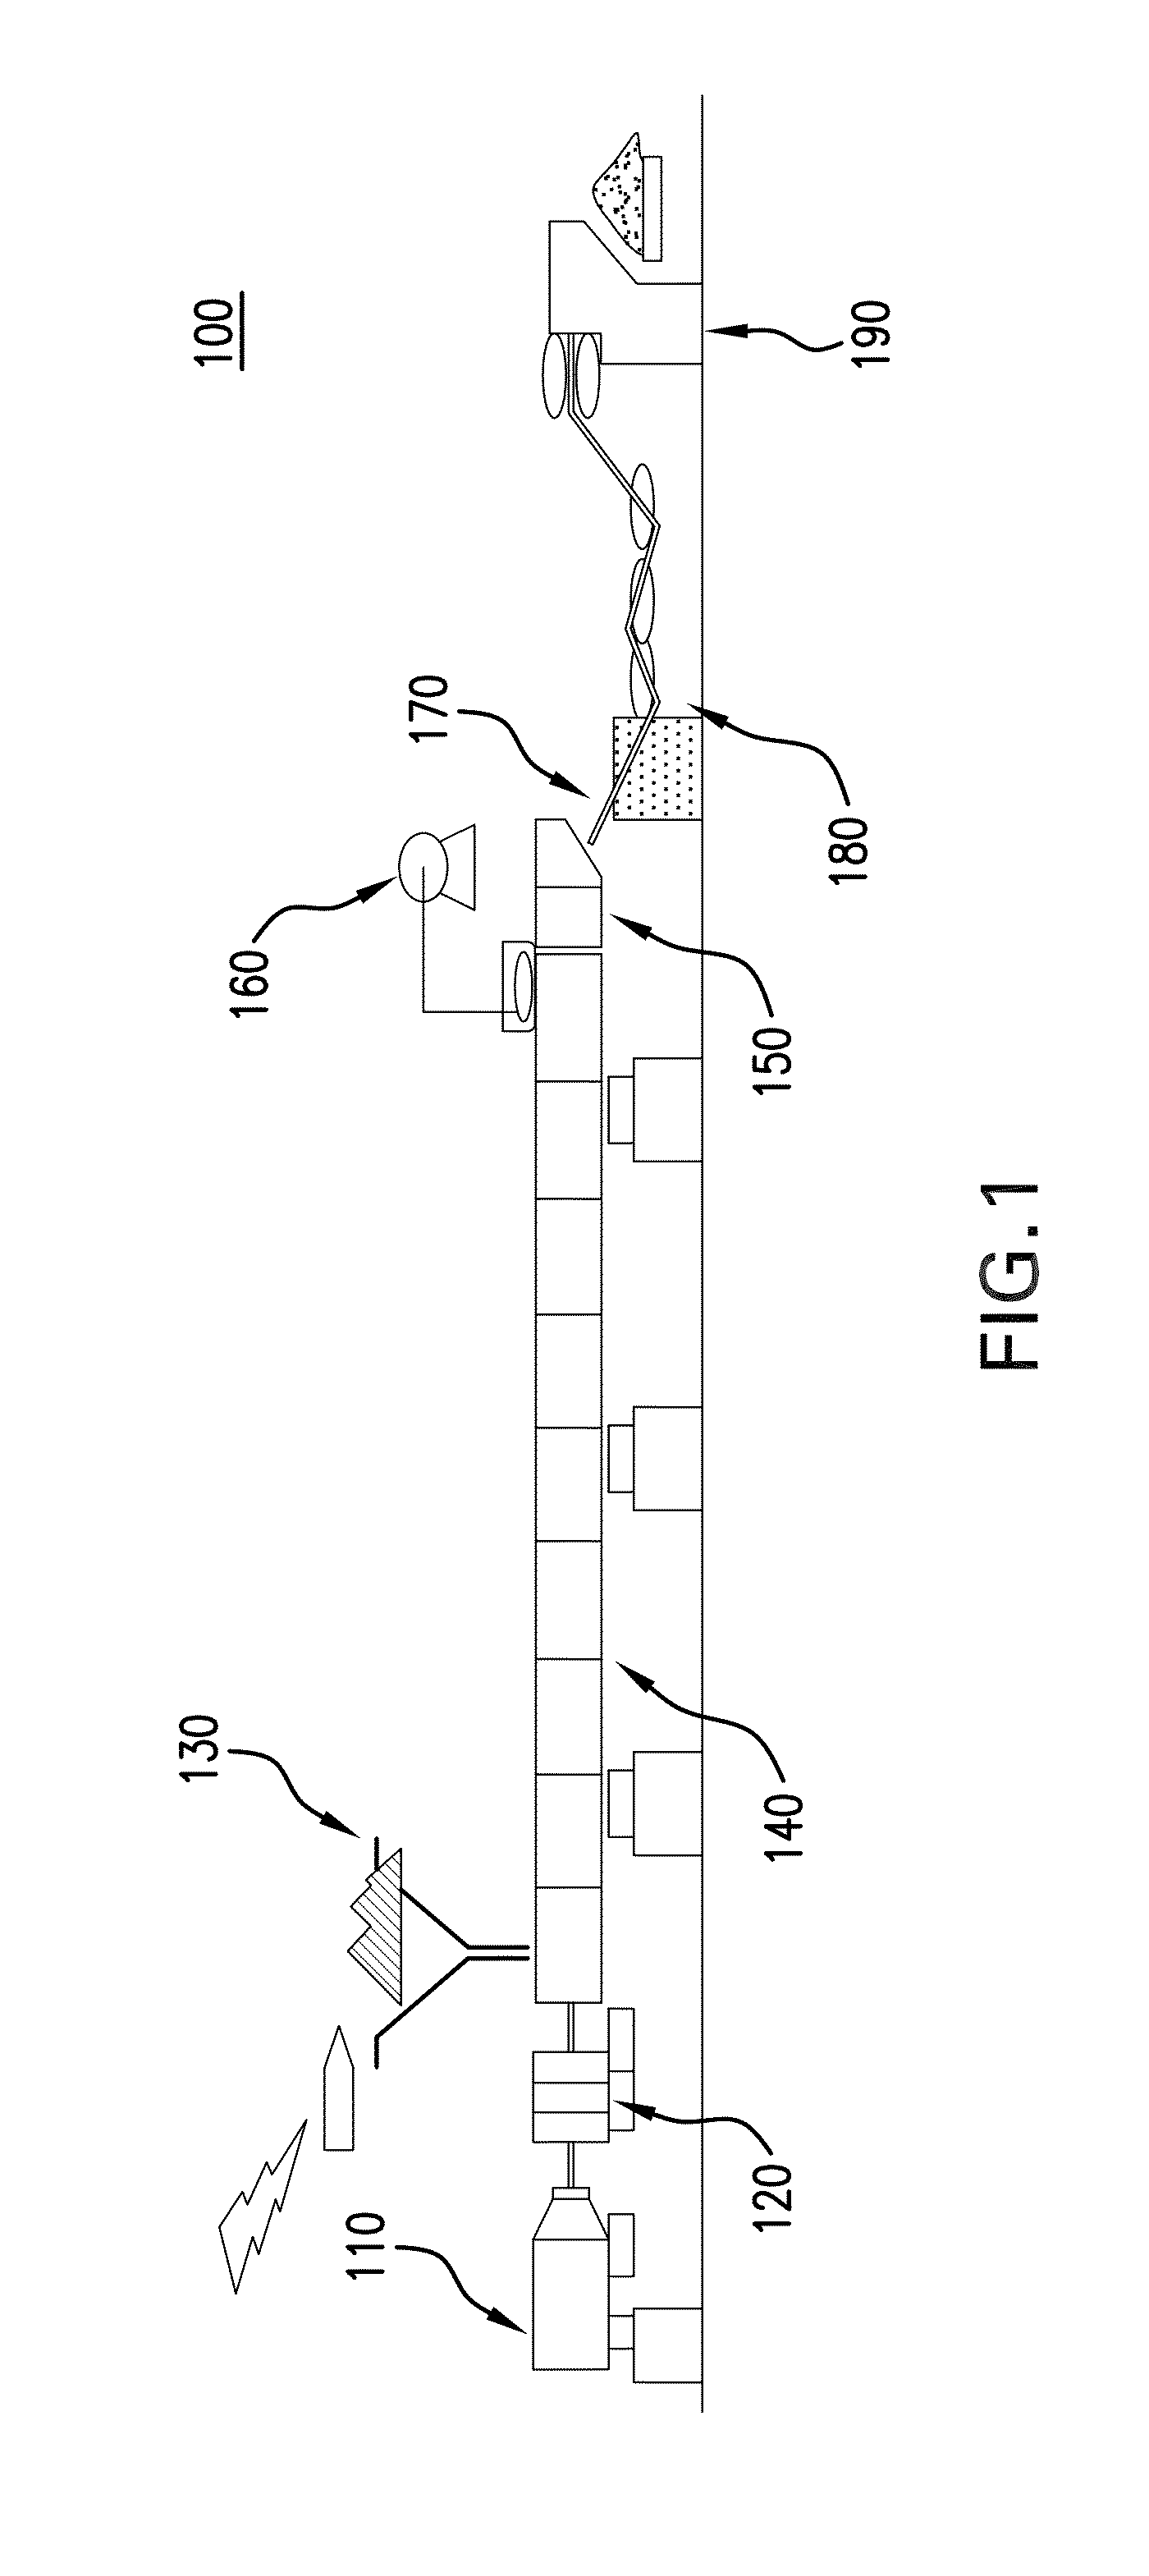 Thermoplastic compositions for laser direct structuring and methods for the manufacture and use thereof